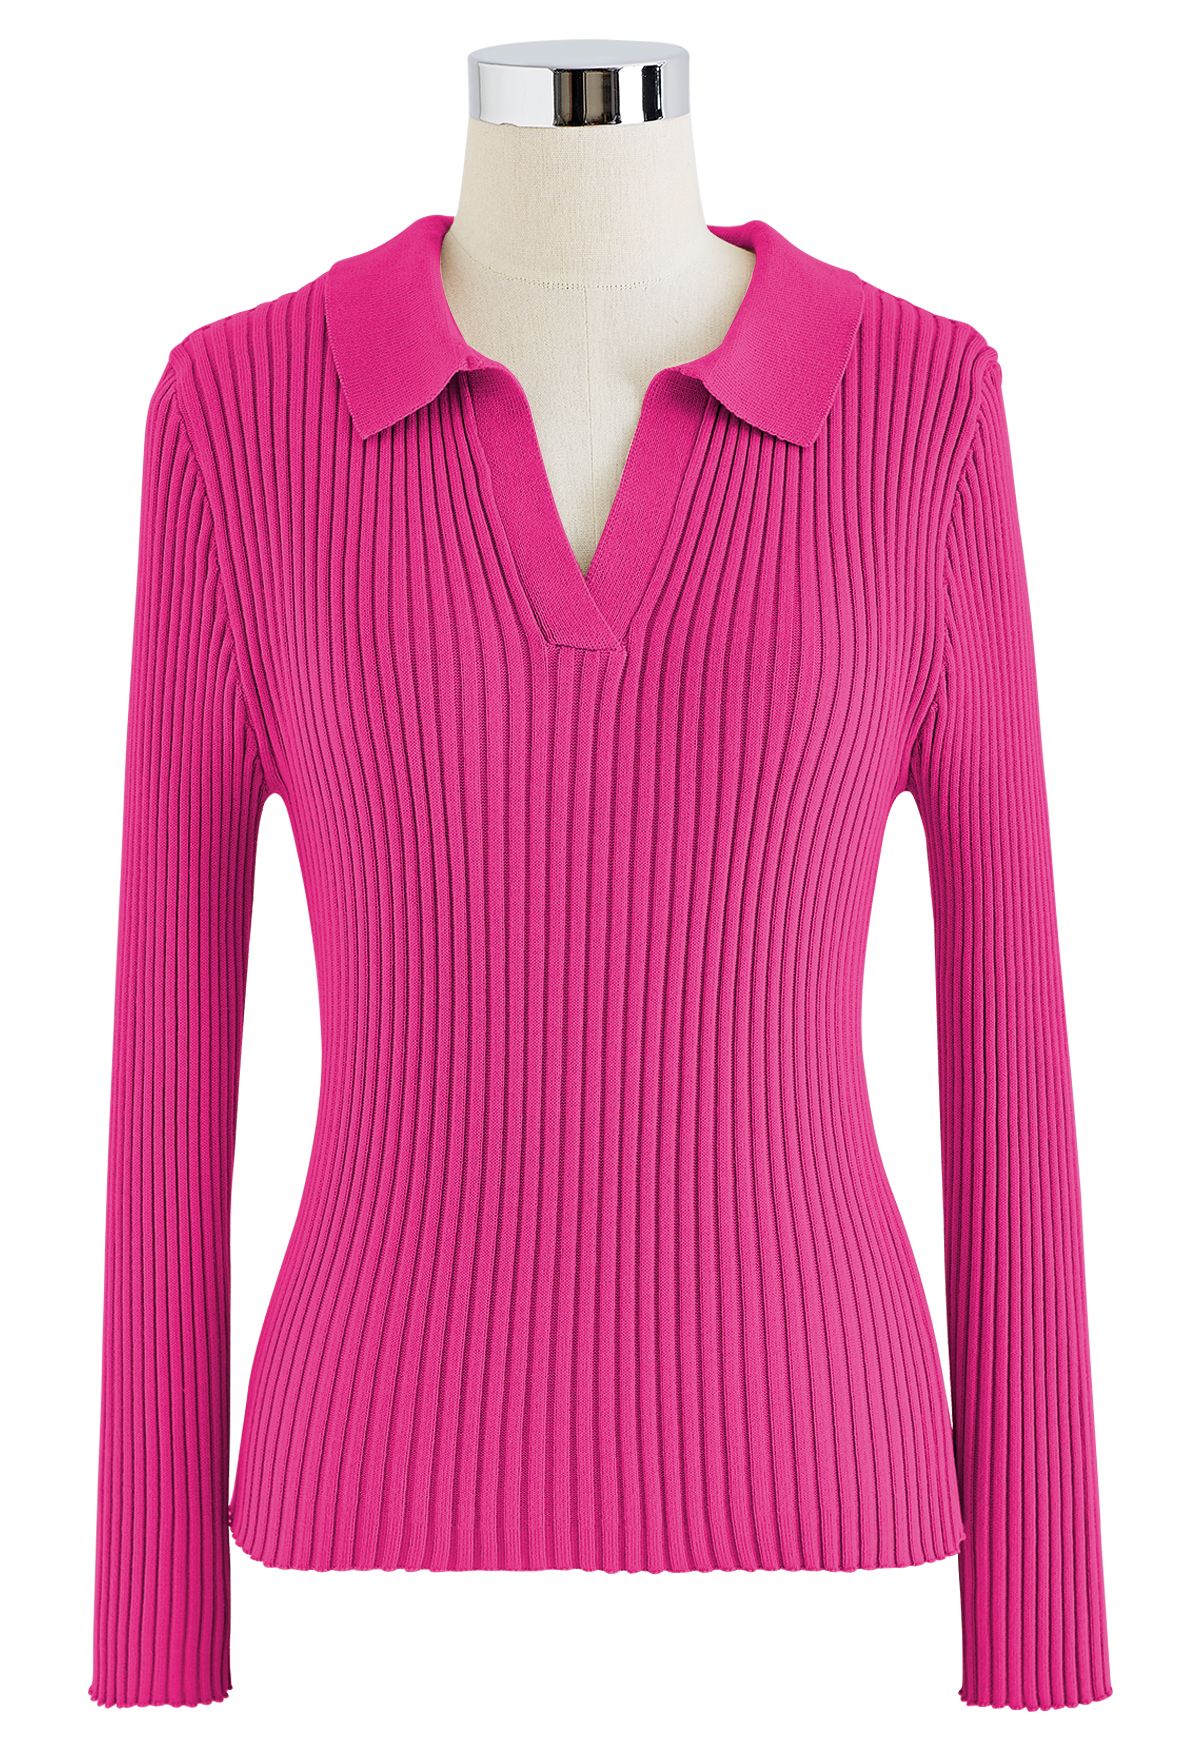 Collared V-Neck Knit Top and Pleated Skirt Set in Hot Pink